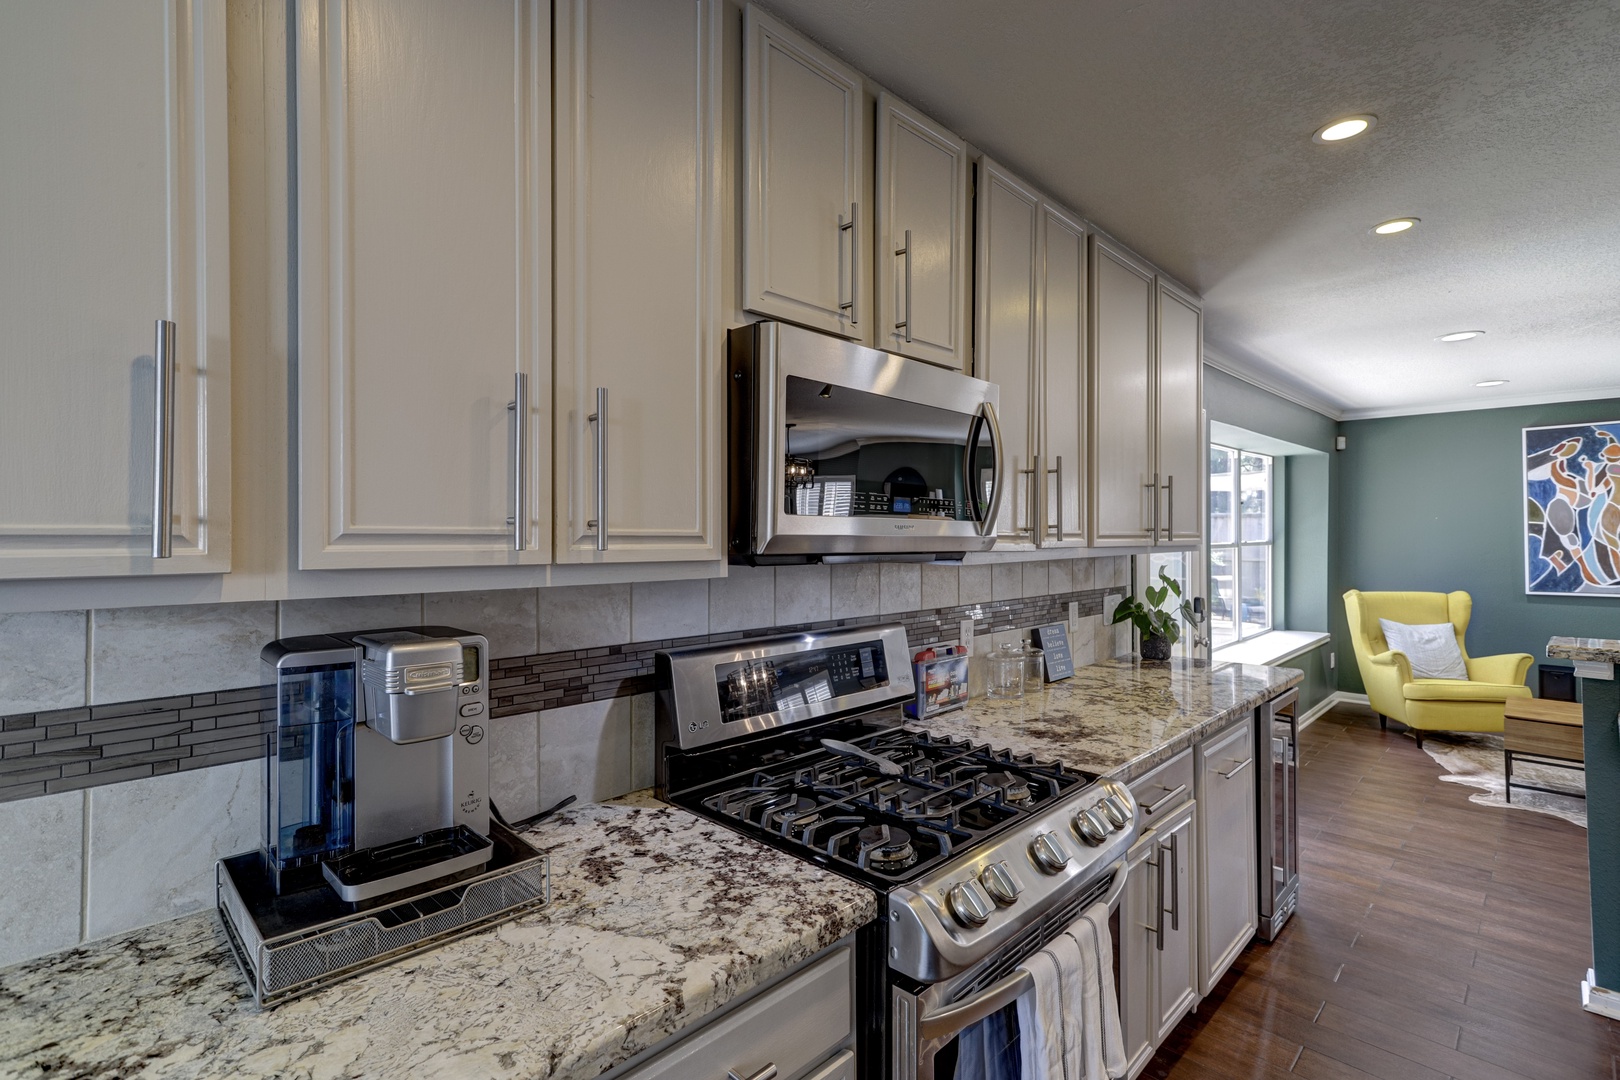 The open, airy kitchen offers ample space & all the comforts of home